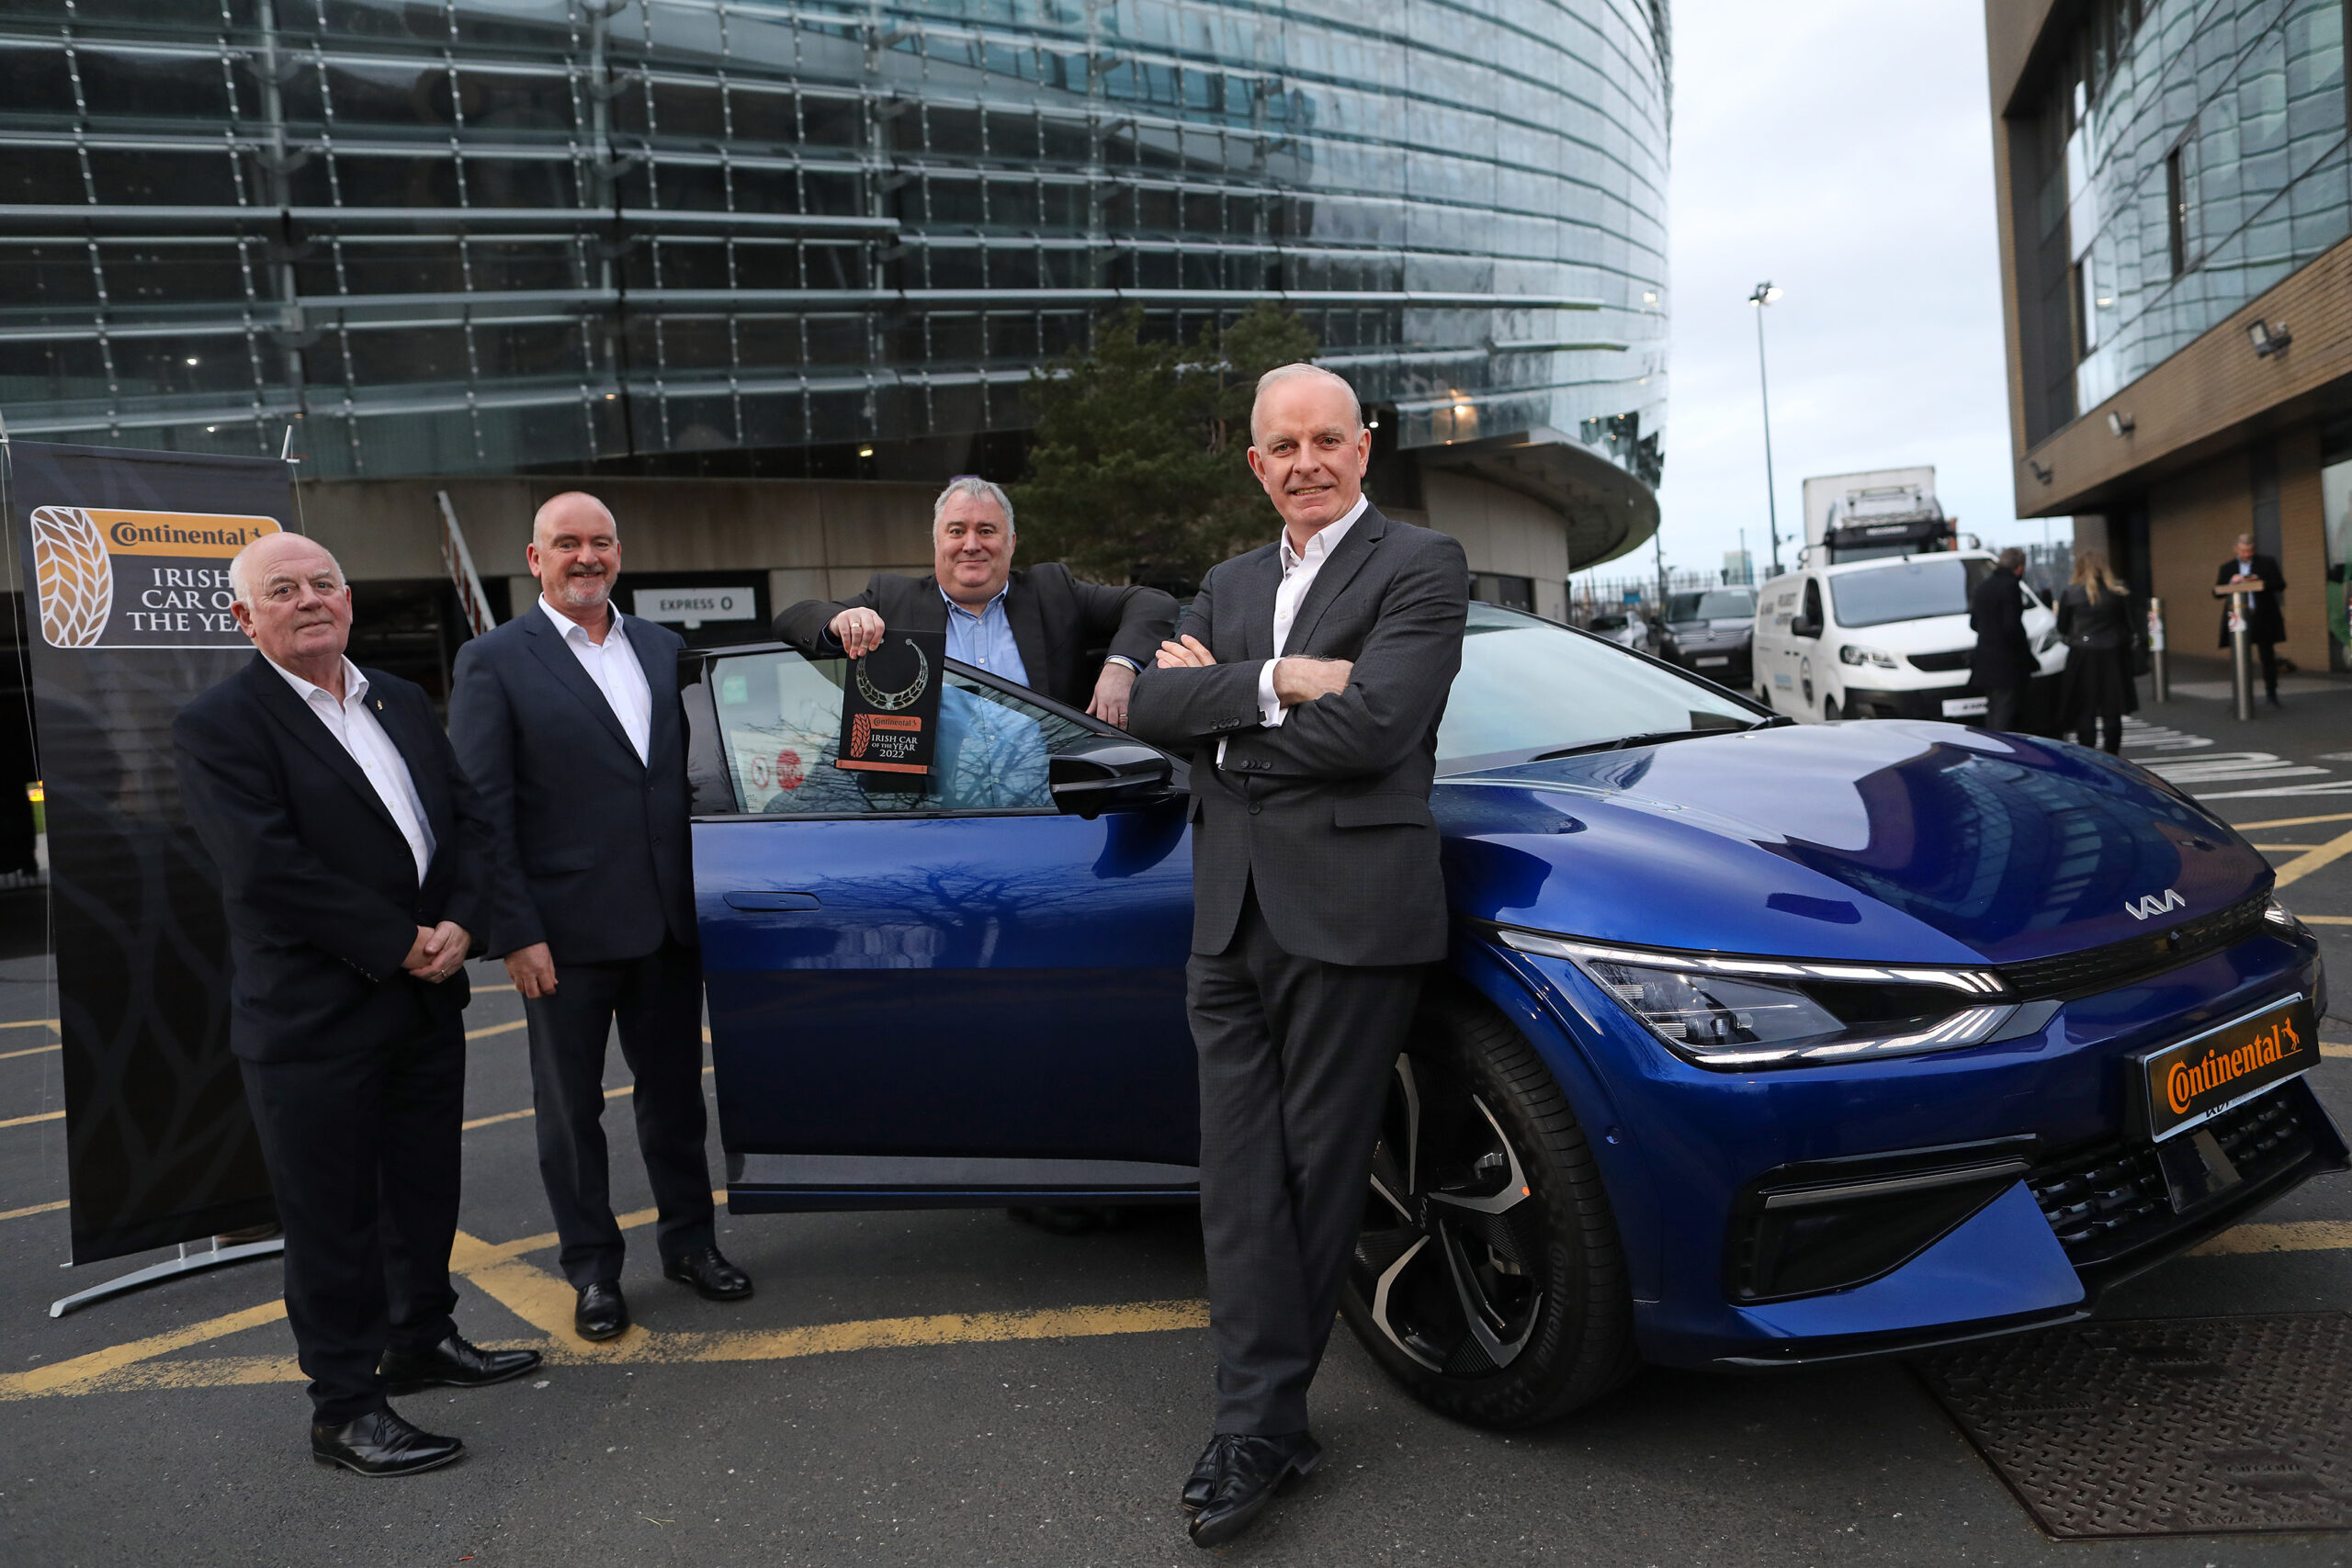 Anthony Conlon and Cathal Doyle, Joint Chairmen, Irish Car of the Year Committee; Ronan Flood, Kia Ireland; and Tom Dennigan, Continental Tyres Ireland